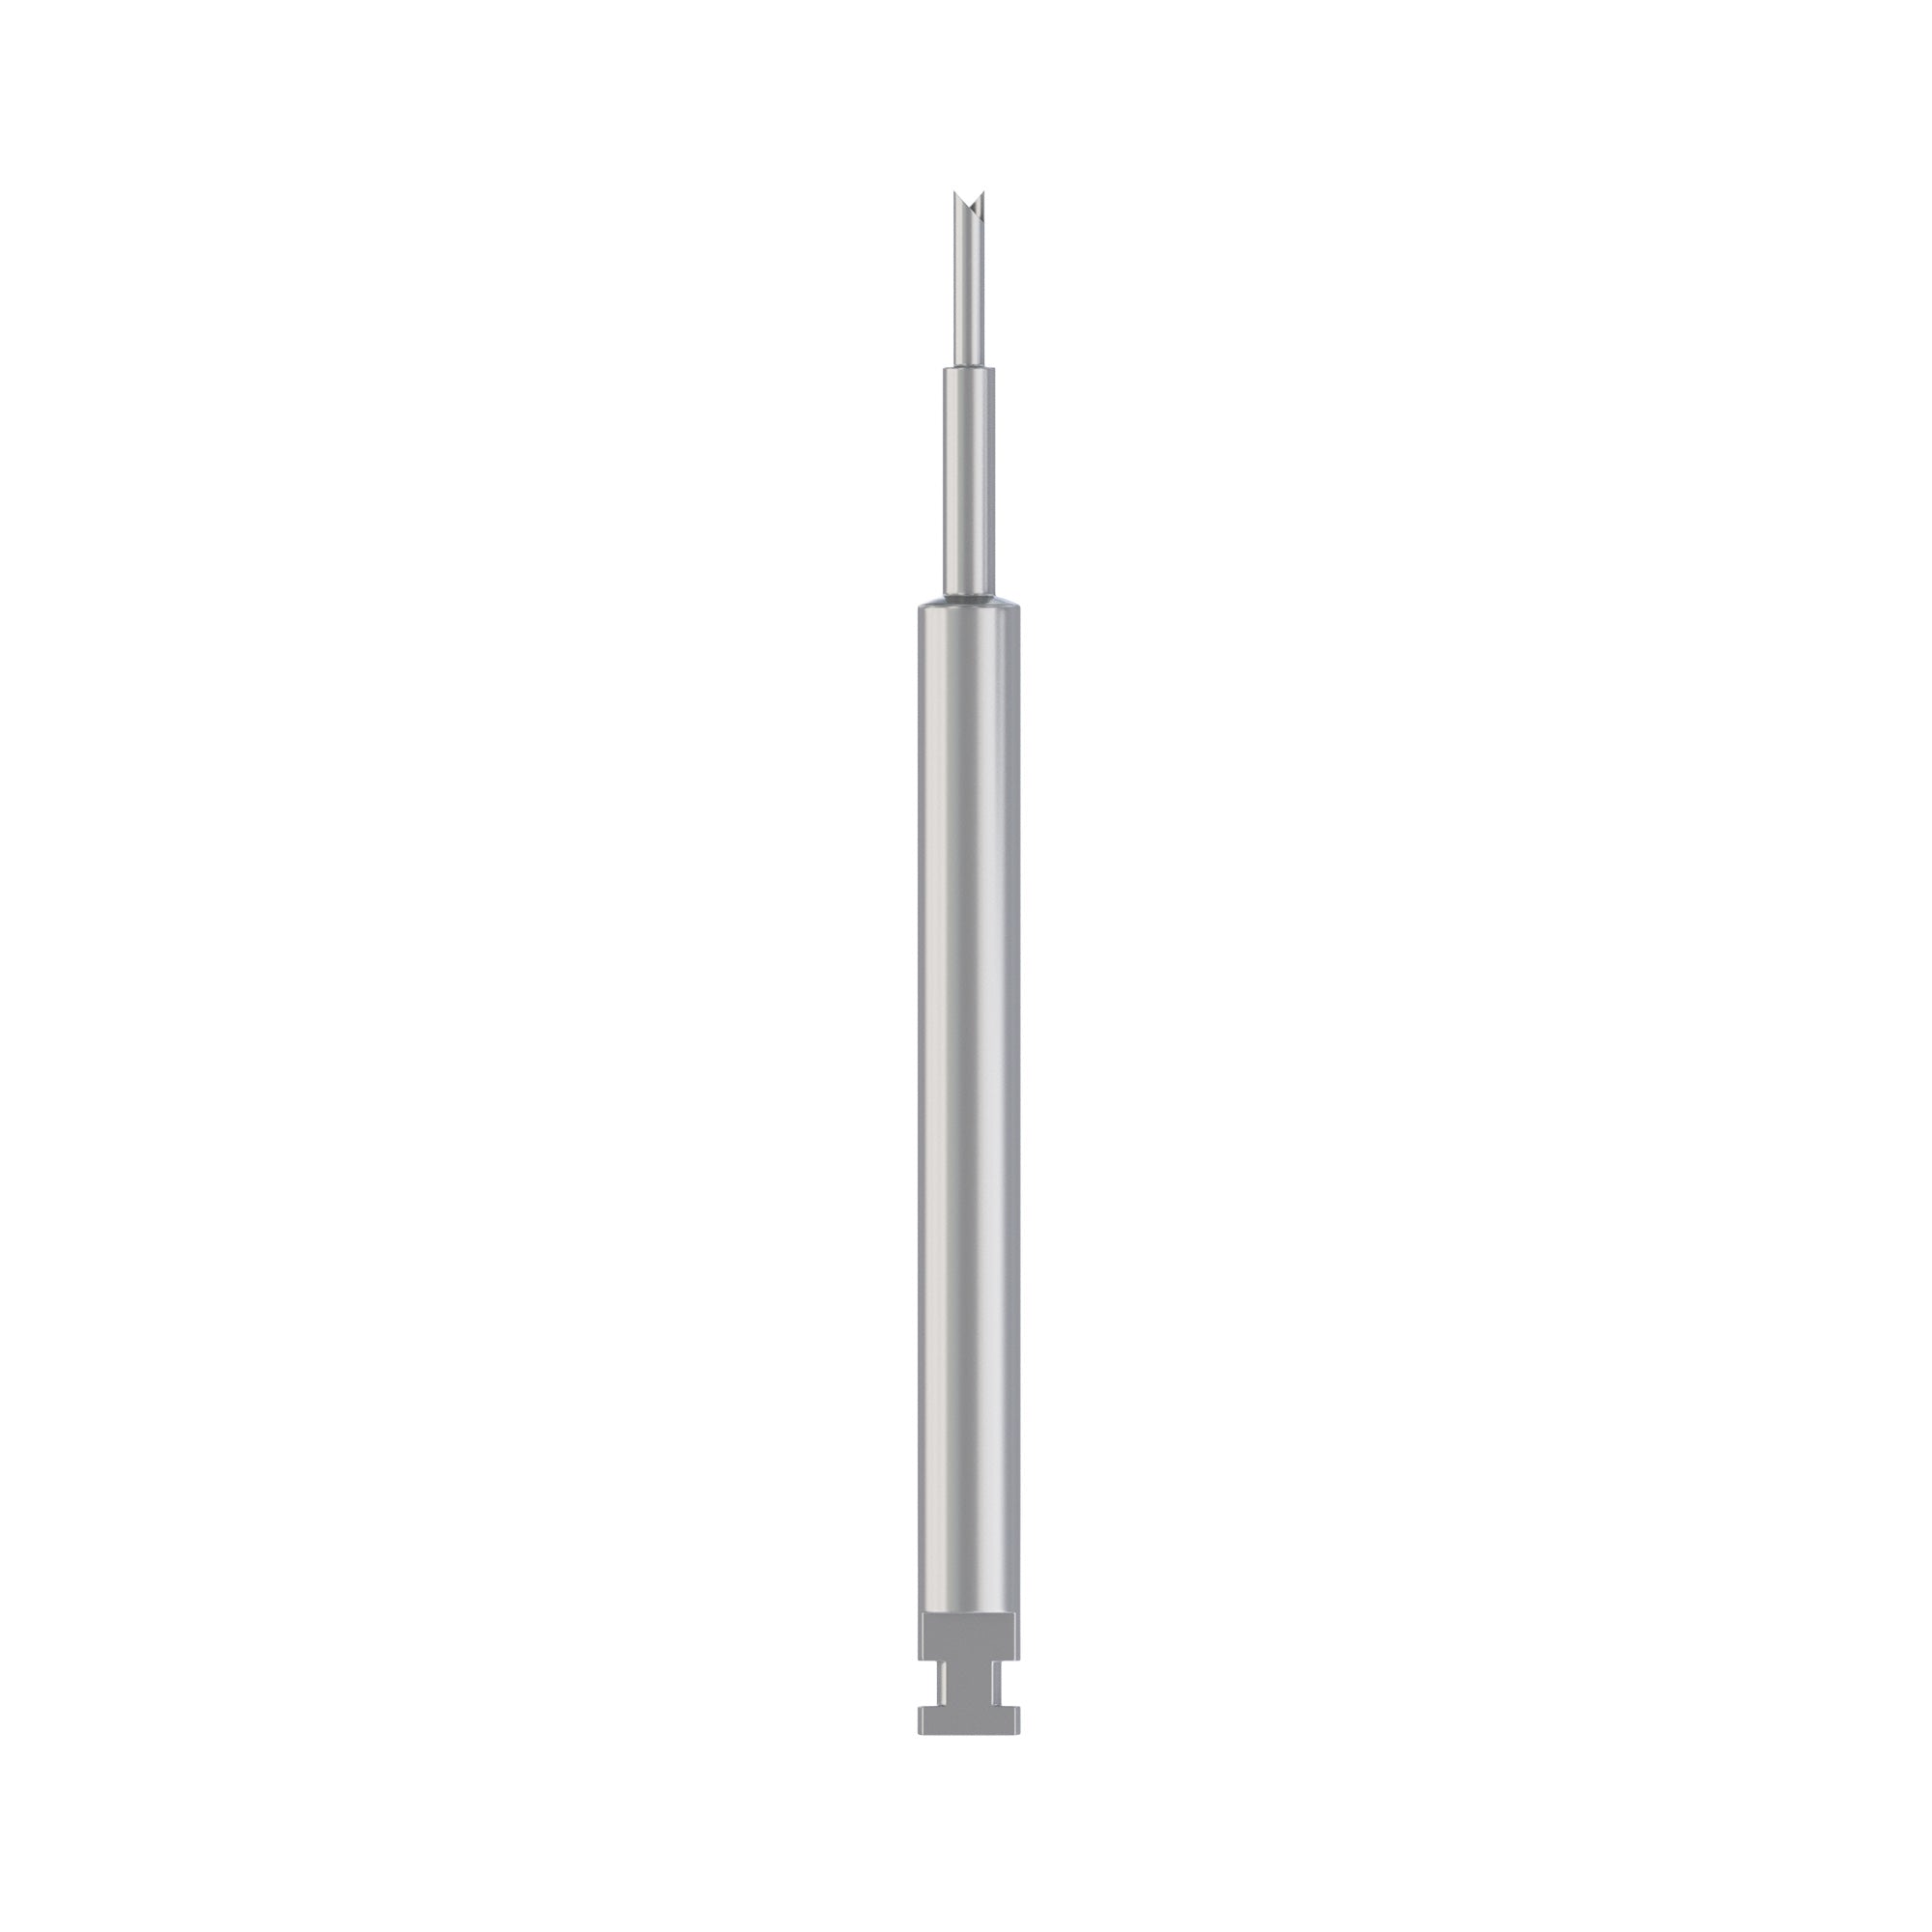 DSI Remove Drill For Extraction of Broken / Fractured Fixation Screw